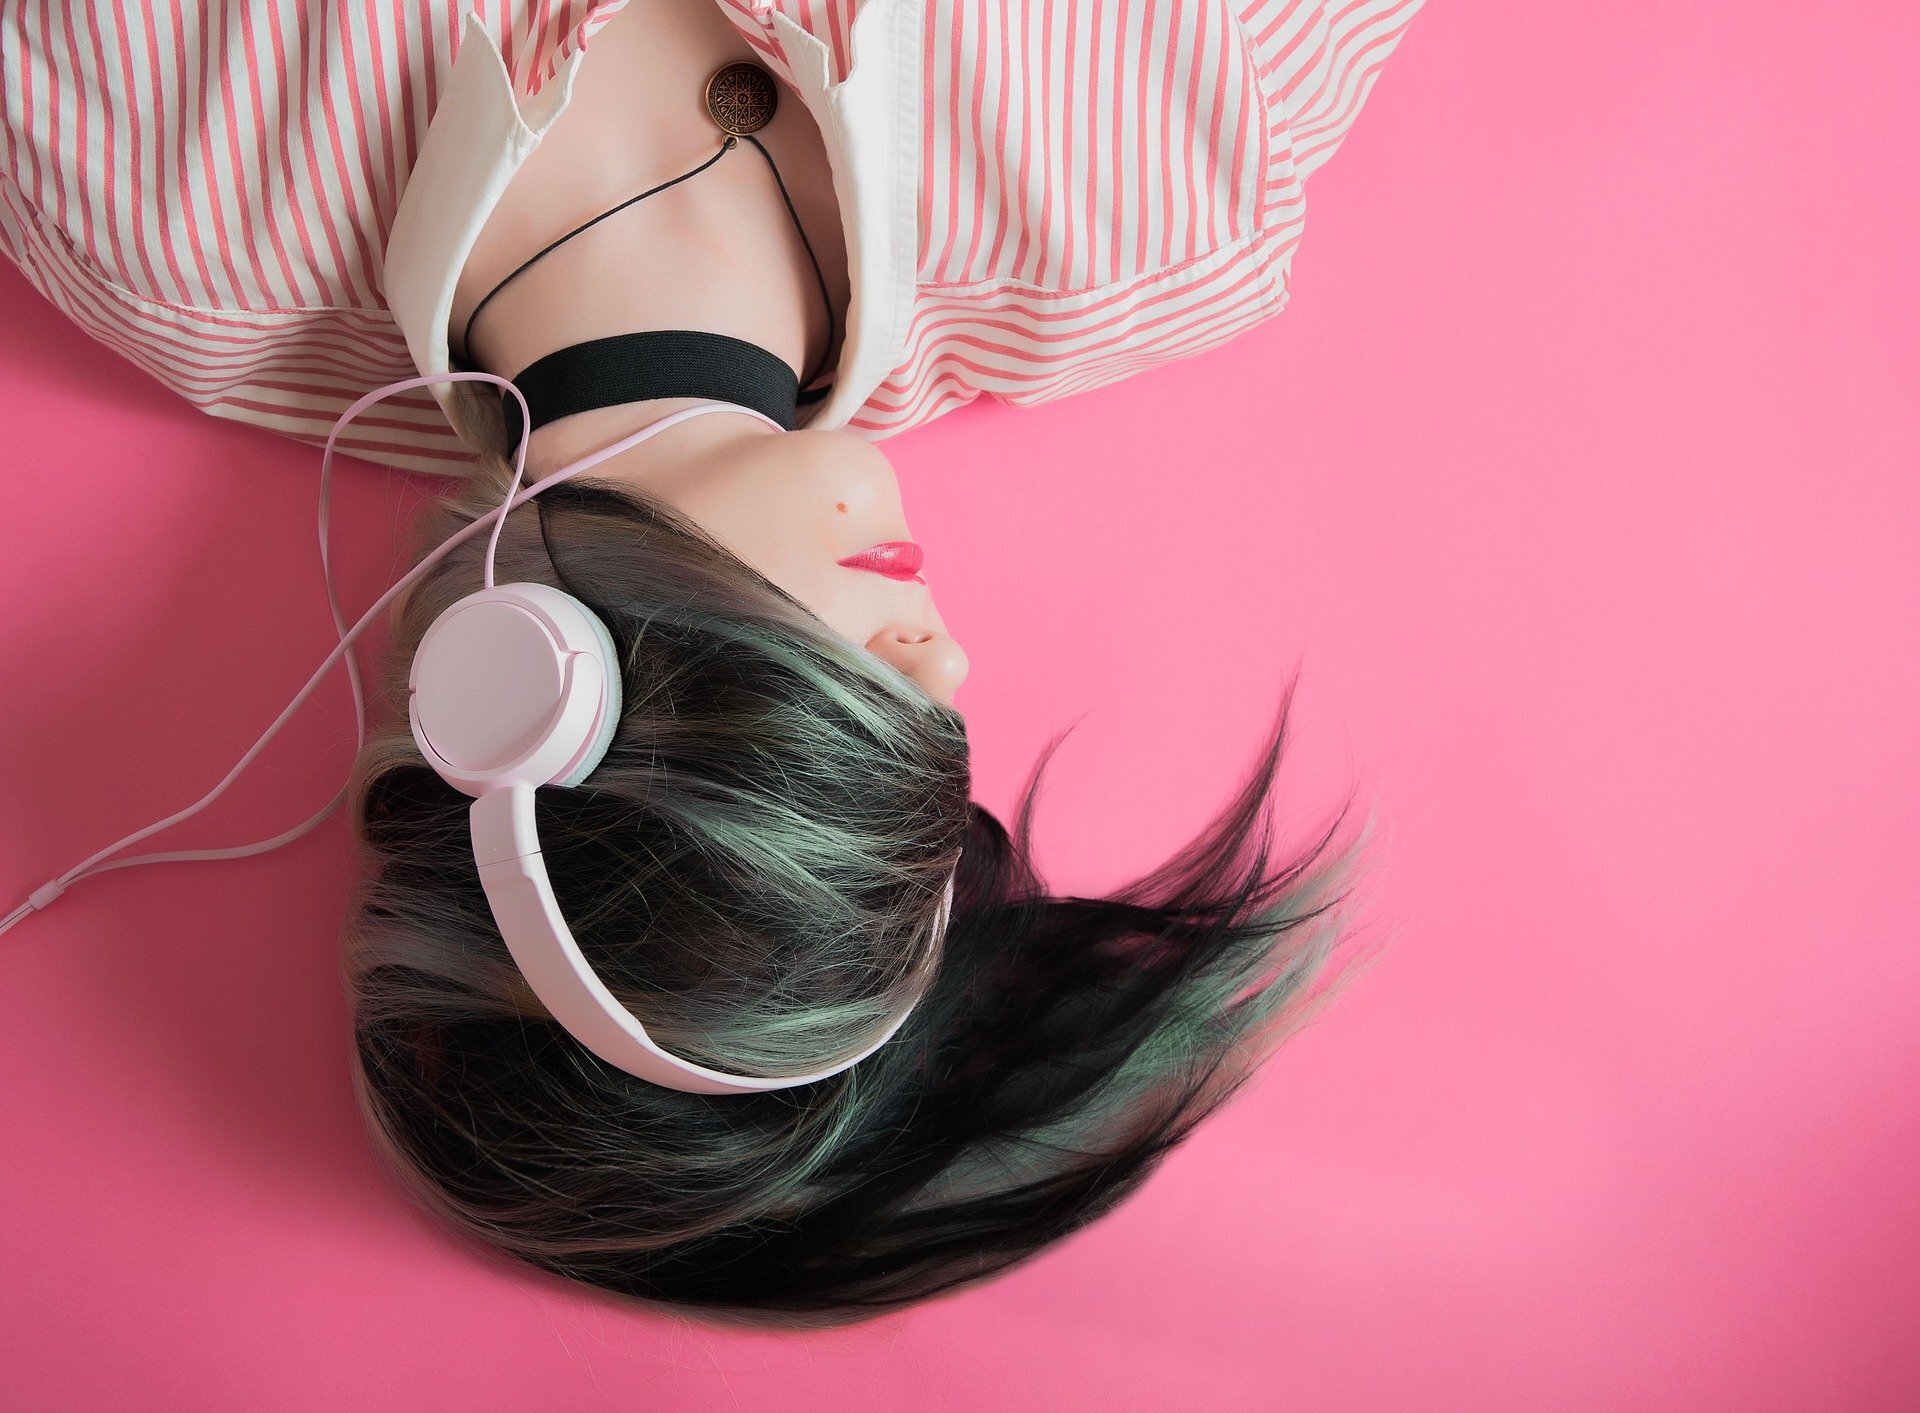 Music streaming consumption fell during COVID-19 lockdowns